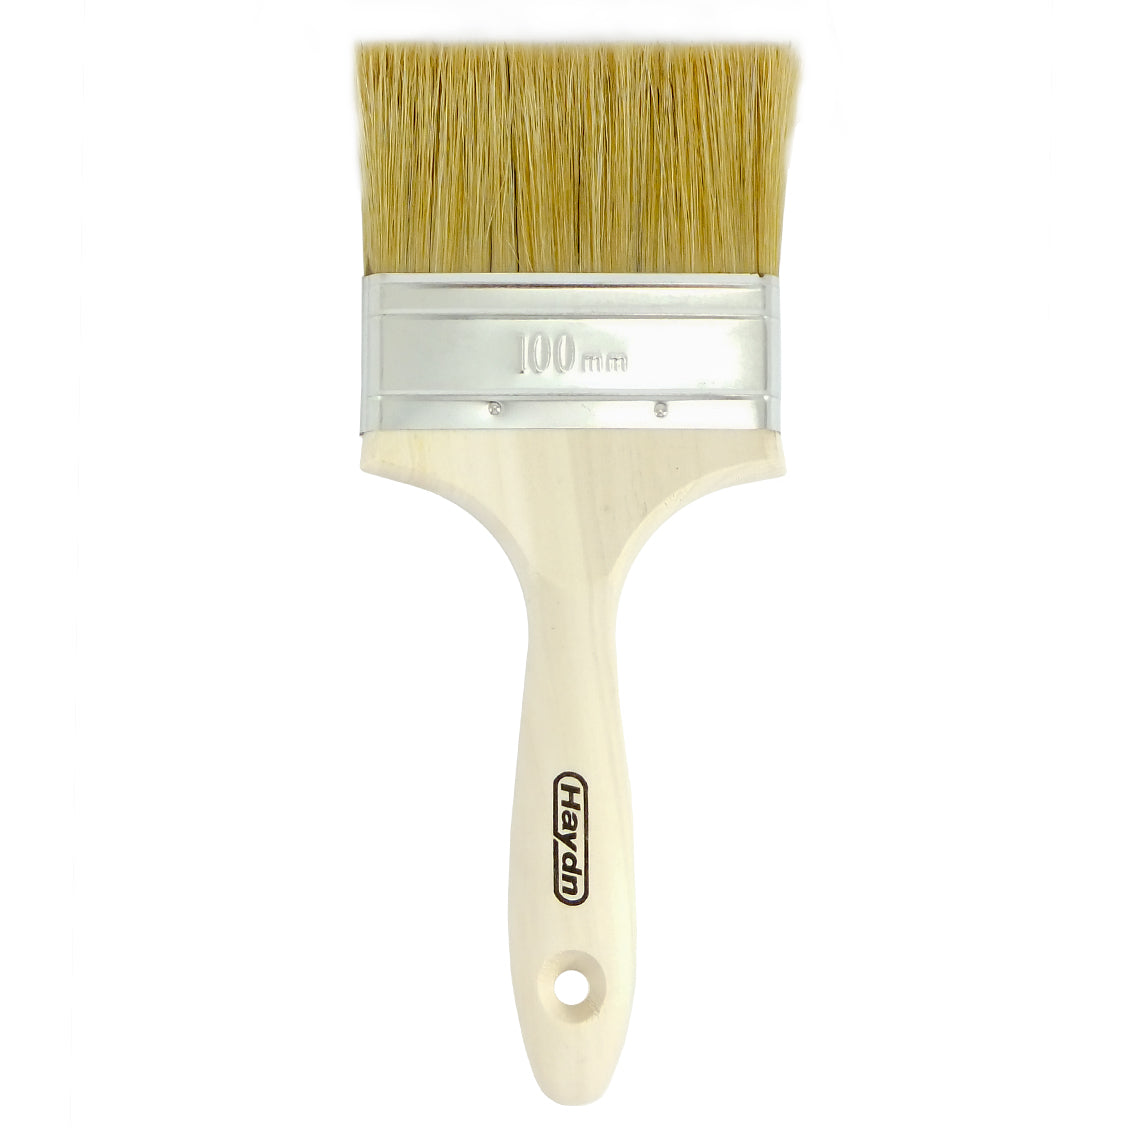 Industrial White Filament Paint Brush